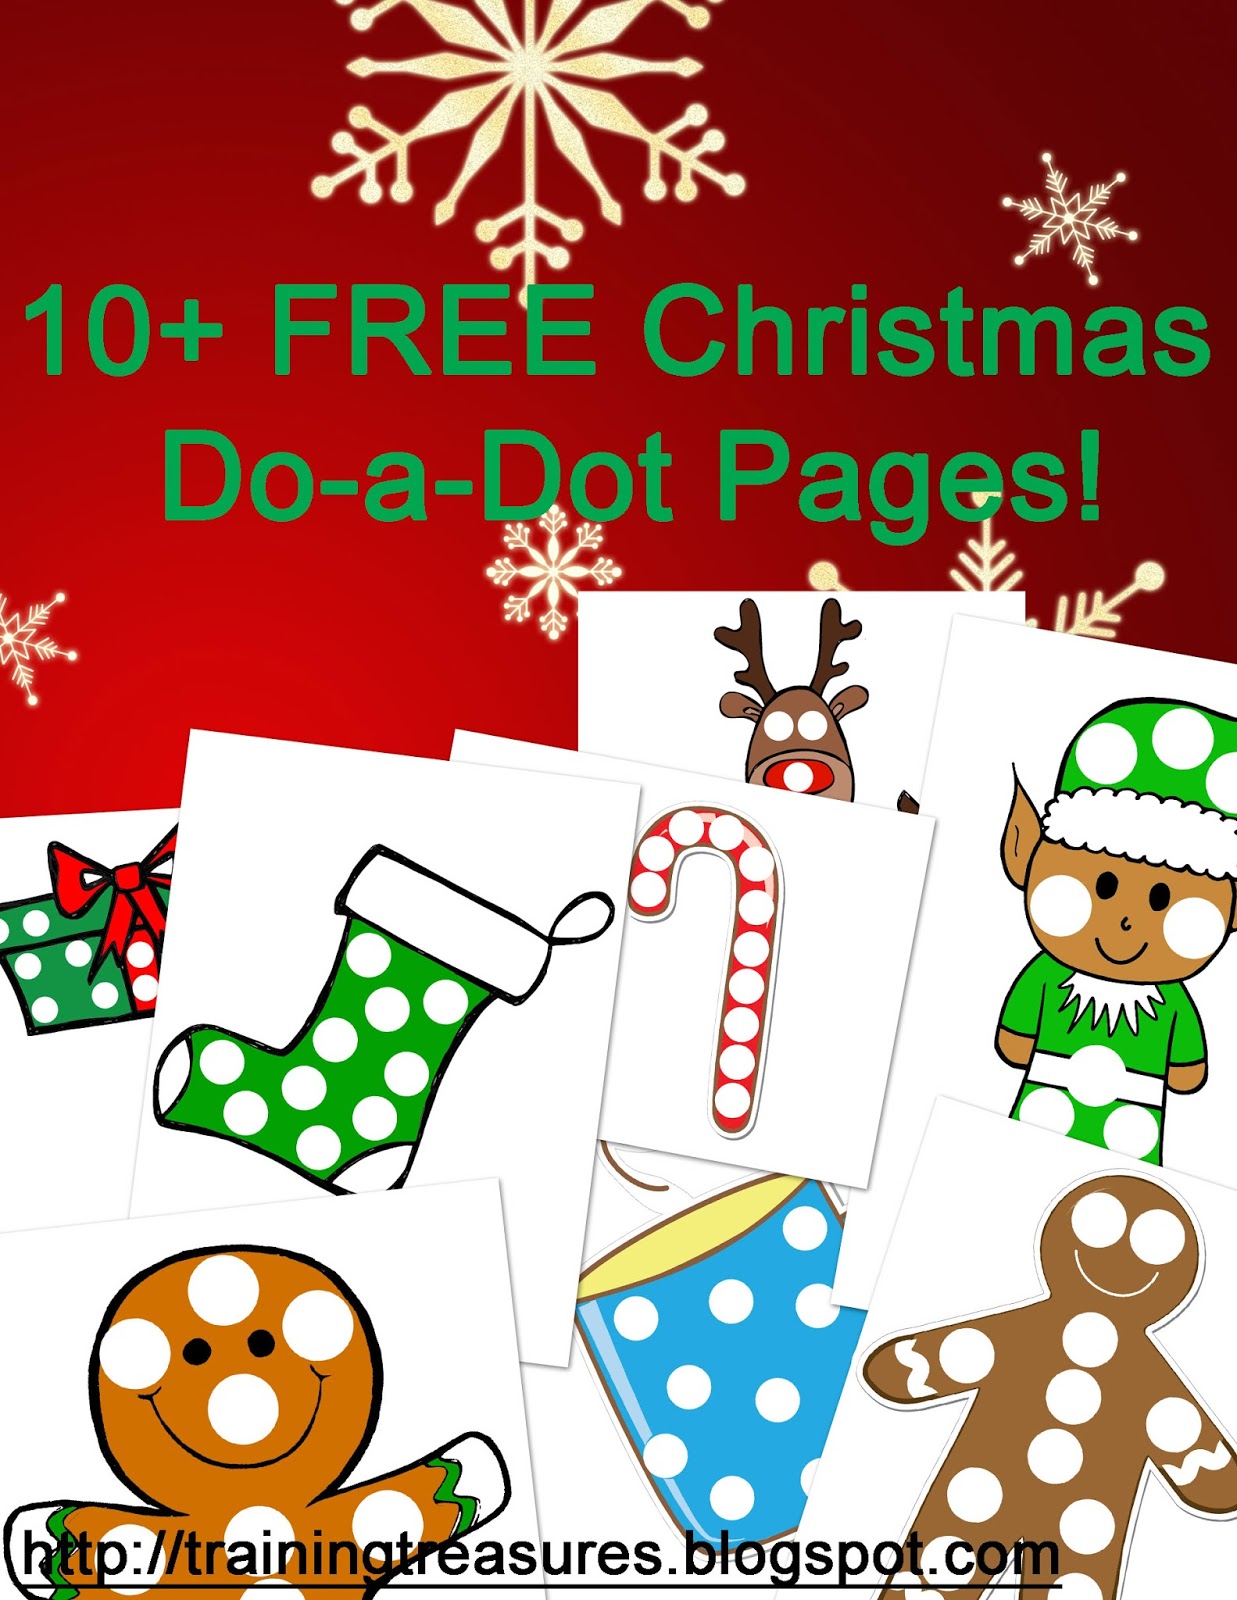 Training Treasures: 10+ FREE Christmas Do-a-Dot Pages!